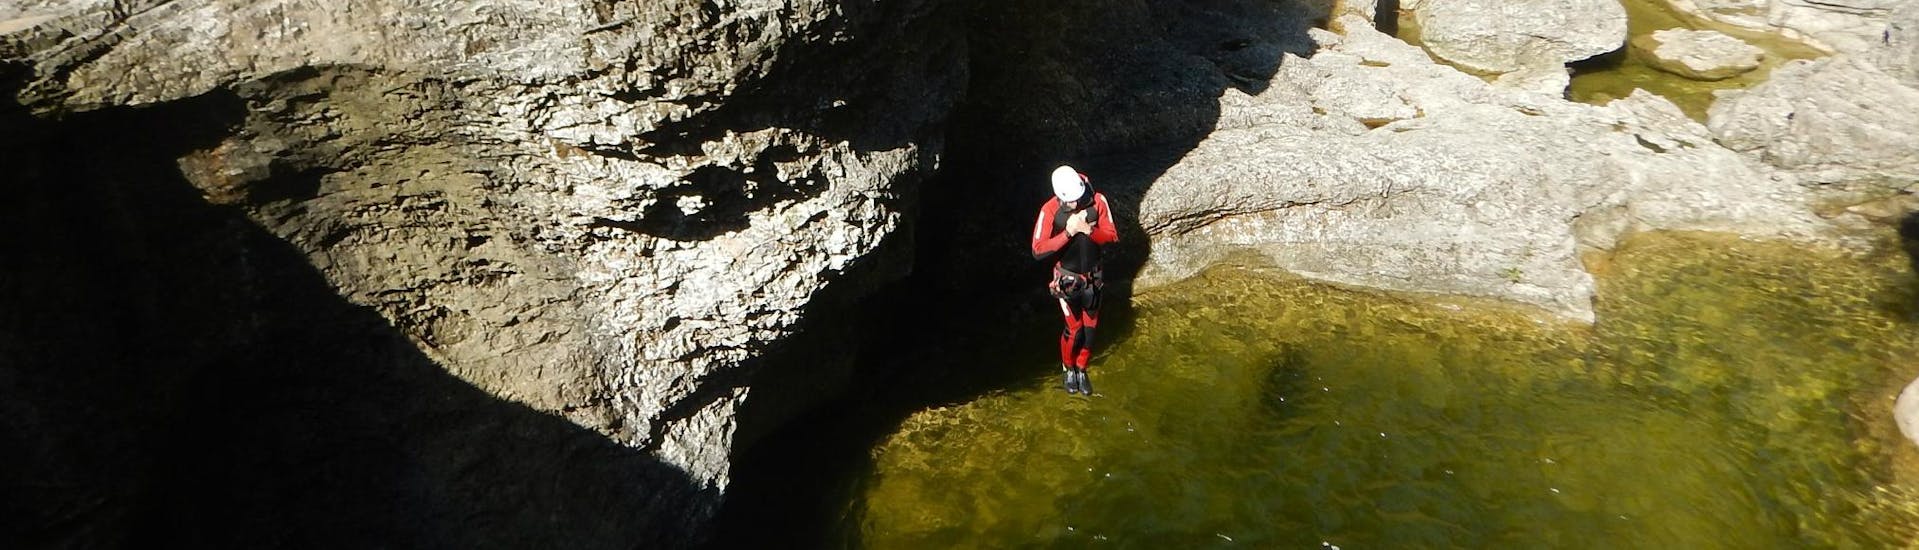 A person jumping into the water during Canyoning near Hallein for Adventurers - Jump'n Fun Special with myadventure Schladming.